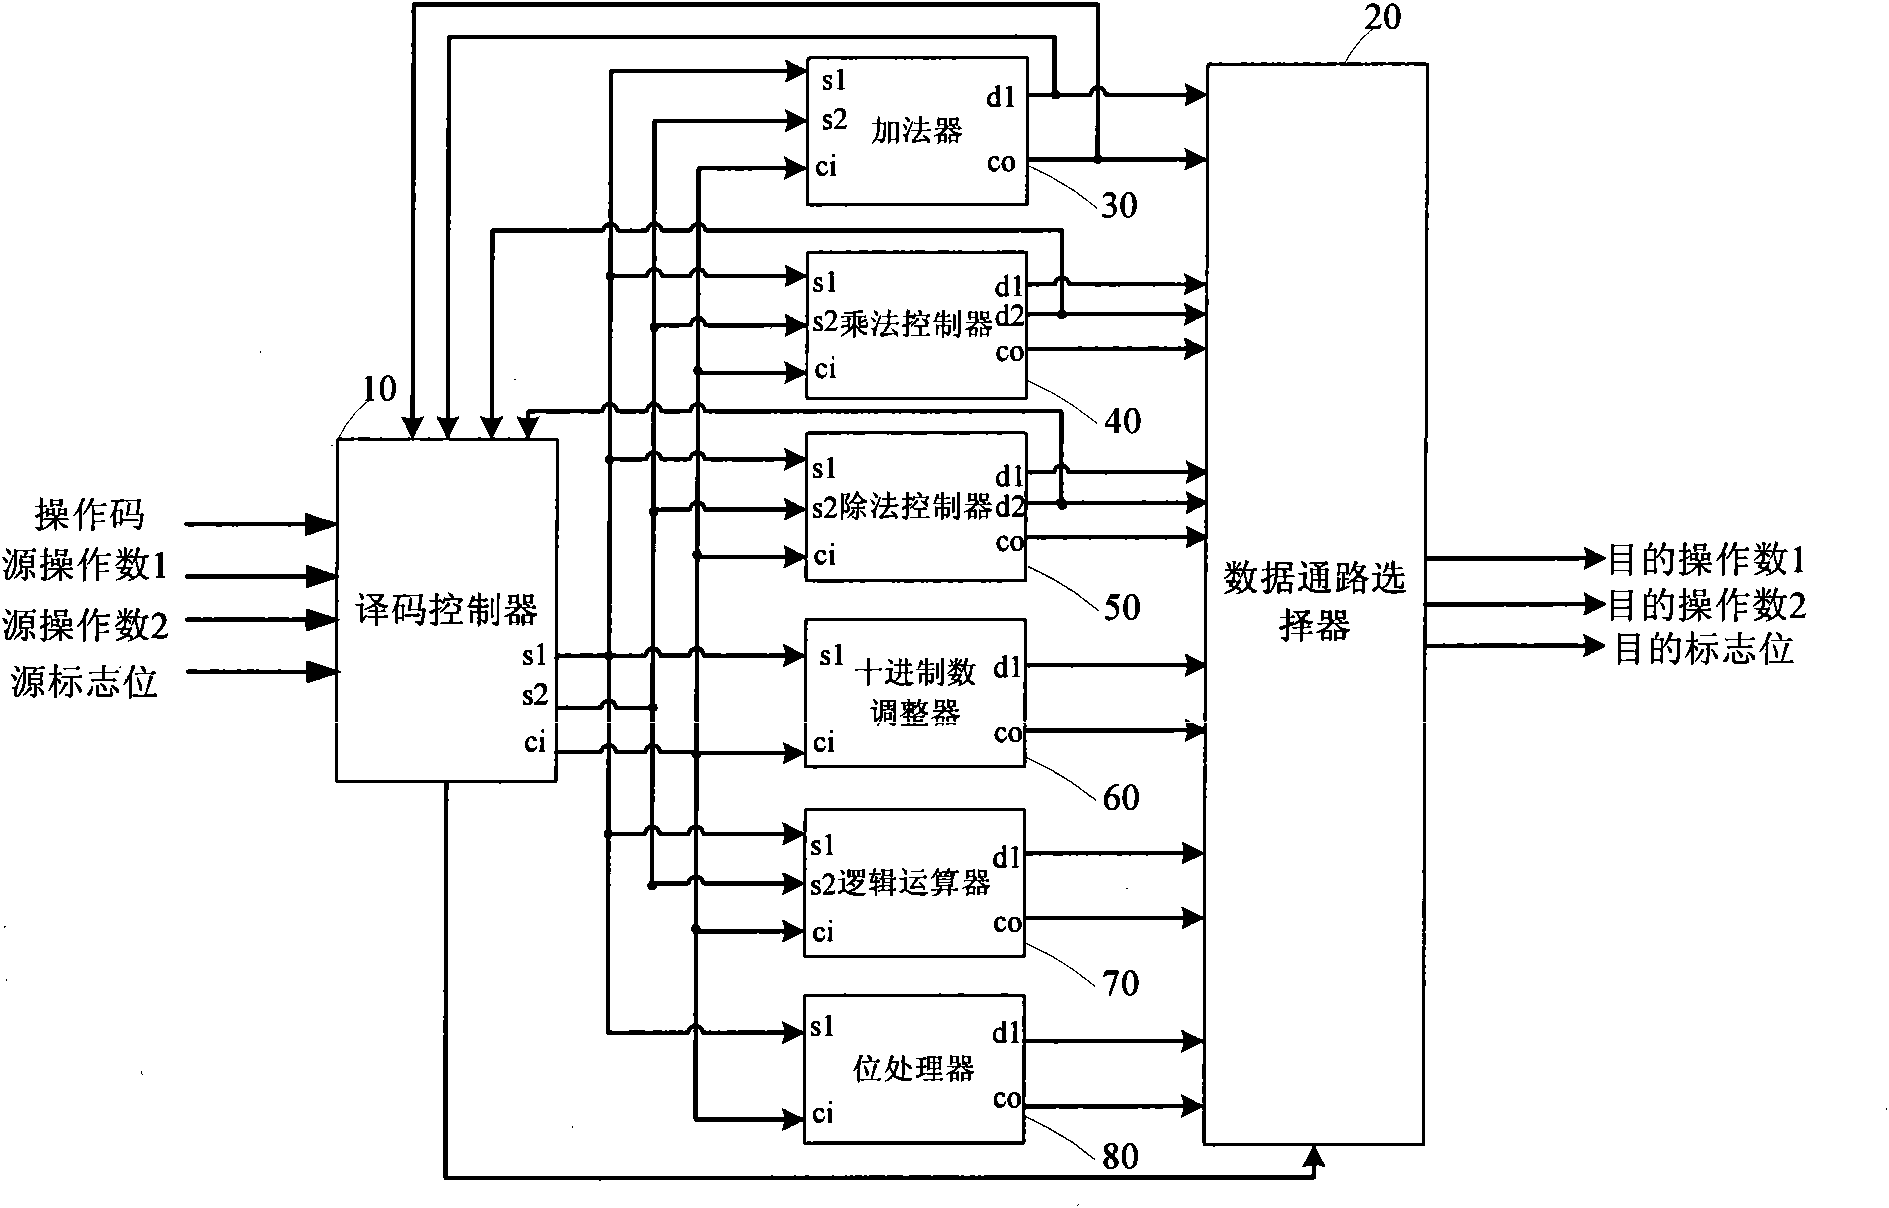 Low-cost arithmetical logic unit based on module and operation code multiplexing